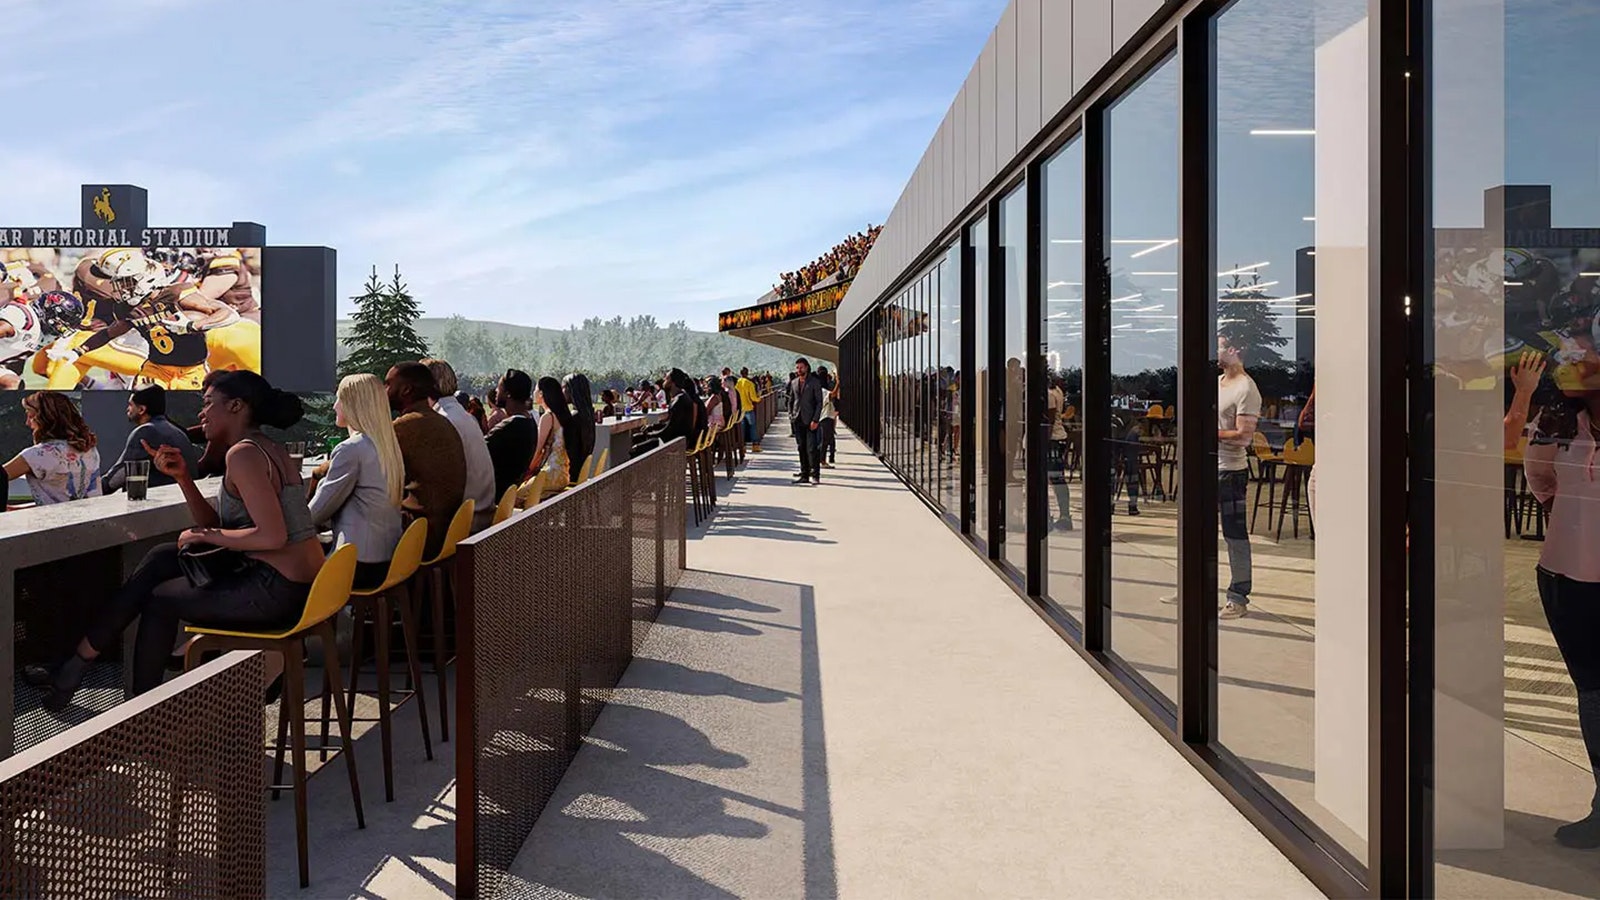 This illustration shows a walkway between new "loge seating" at War Memorial and more upscale indoor box seating areas.